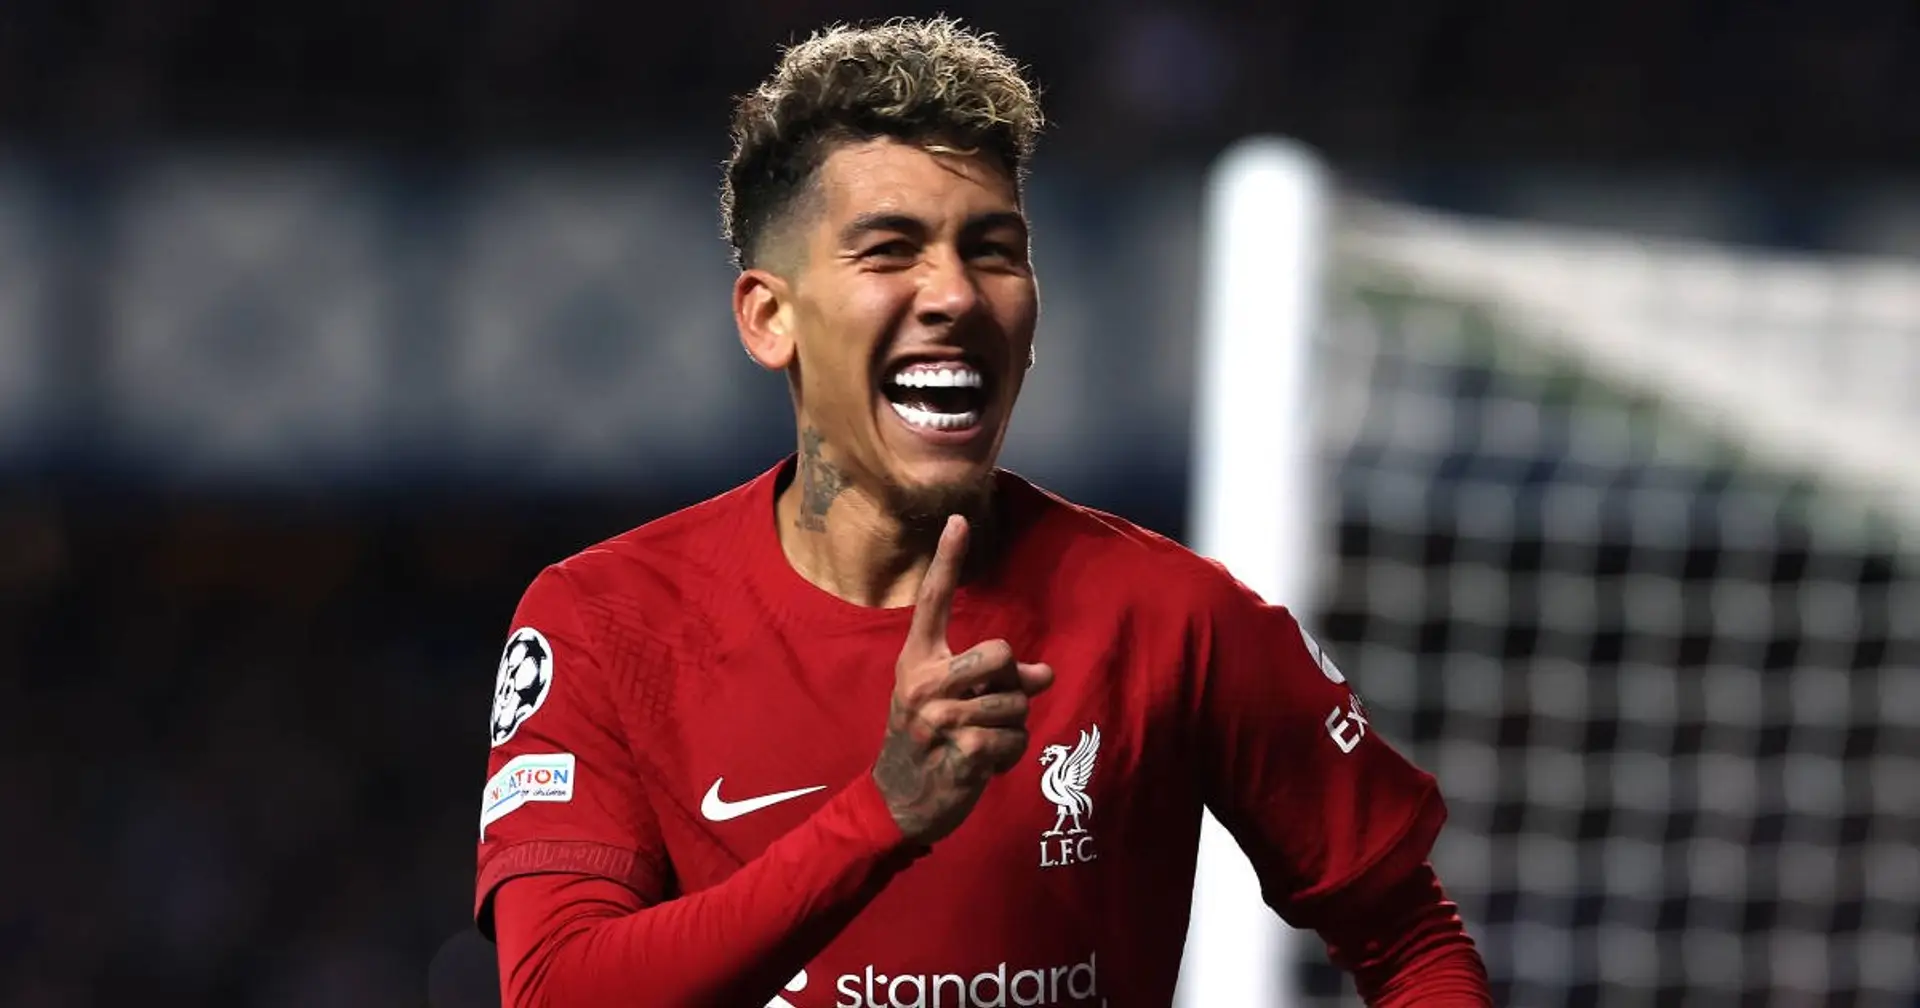 Liverpool offer Firmino new short-term contract: Romano